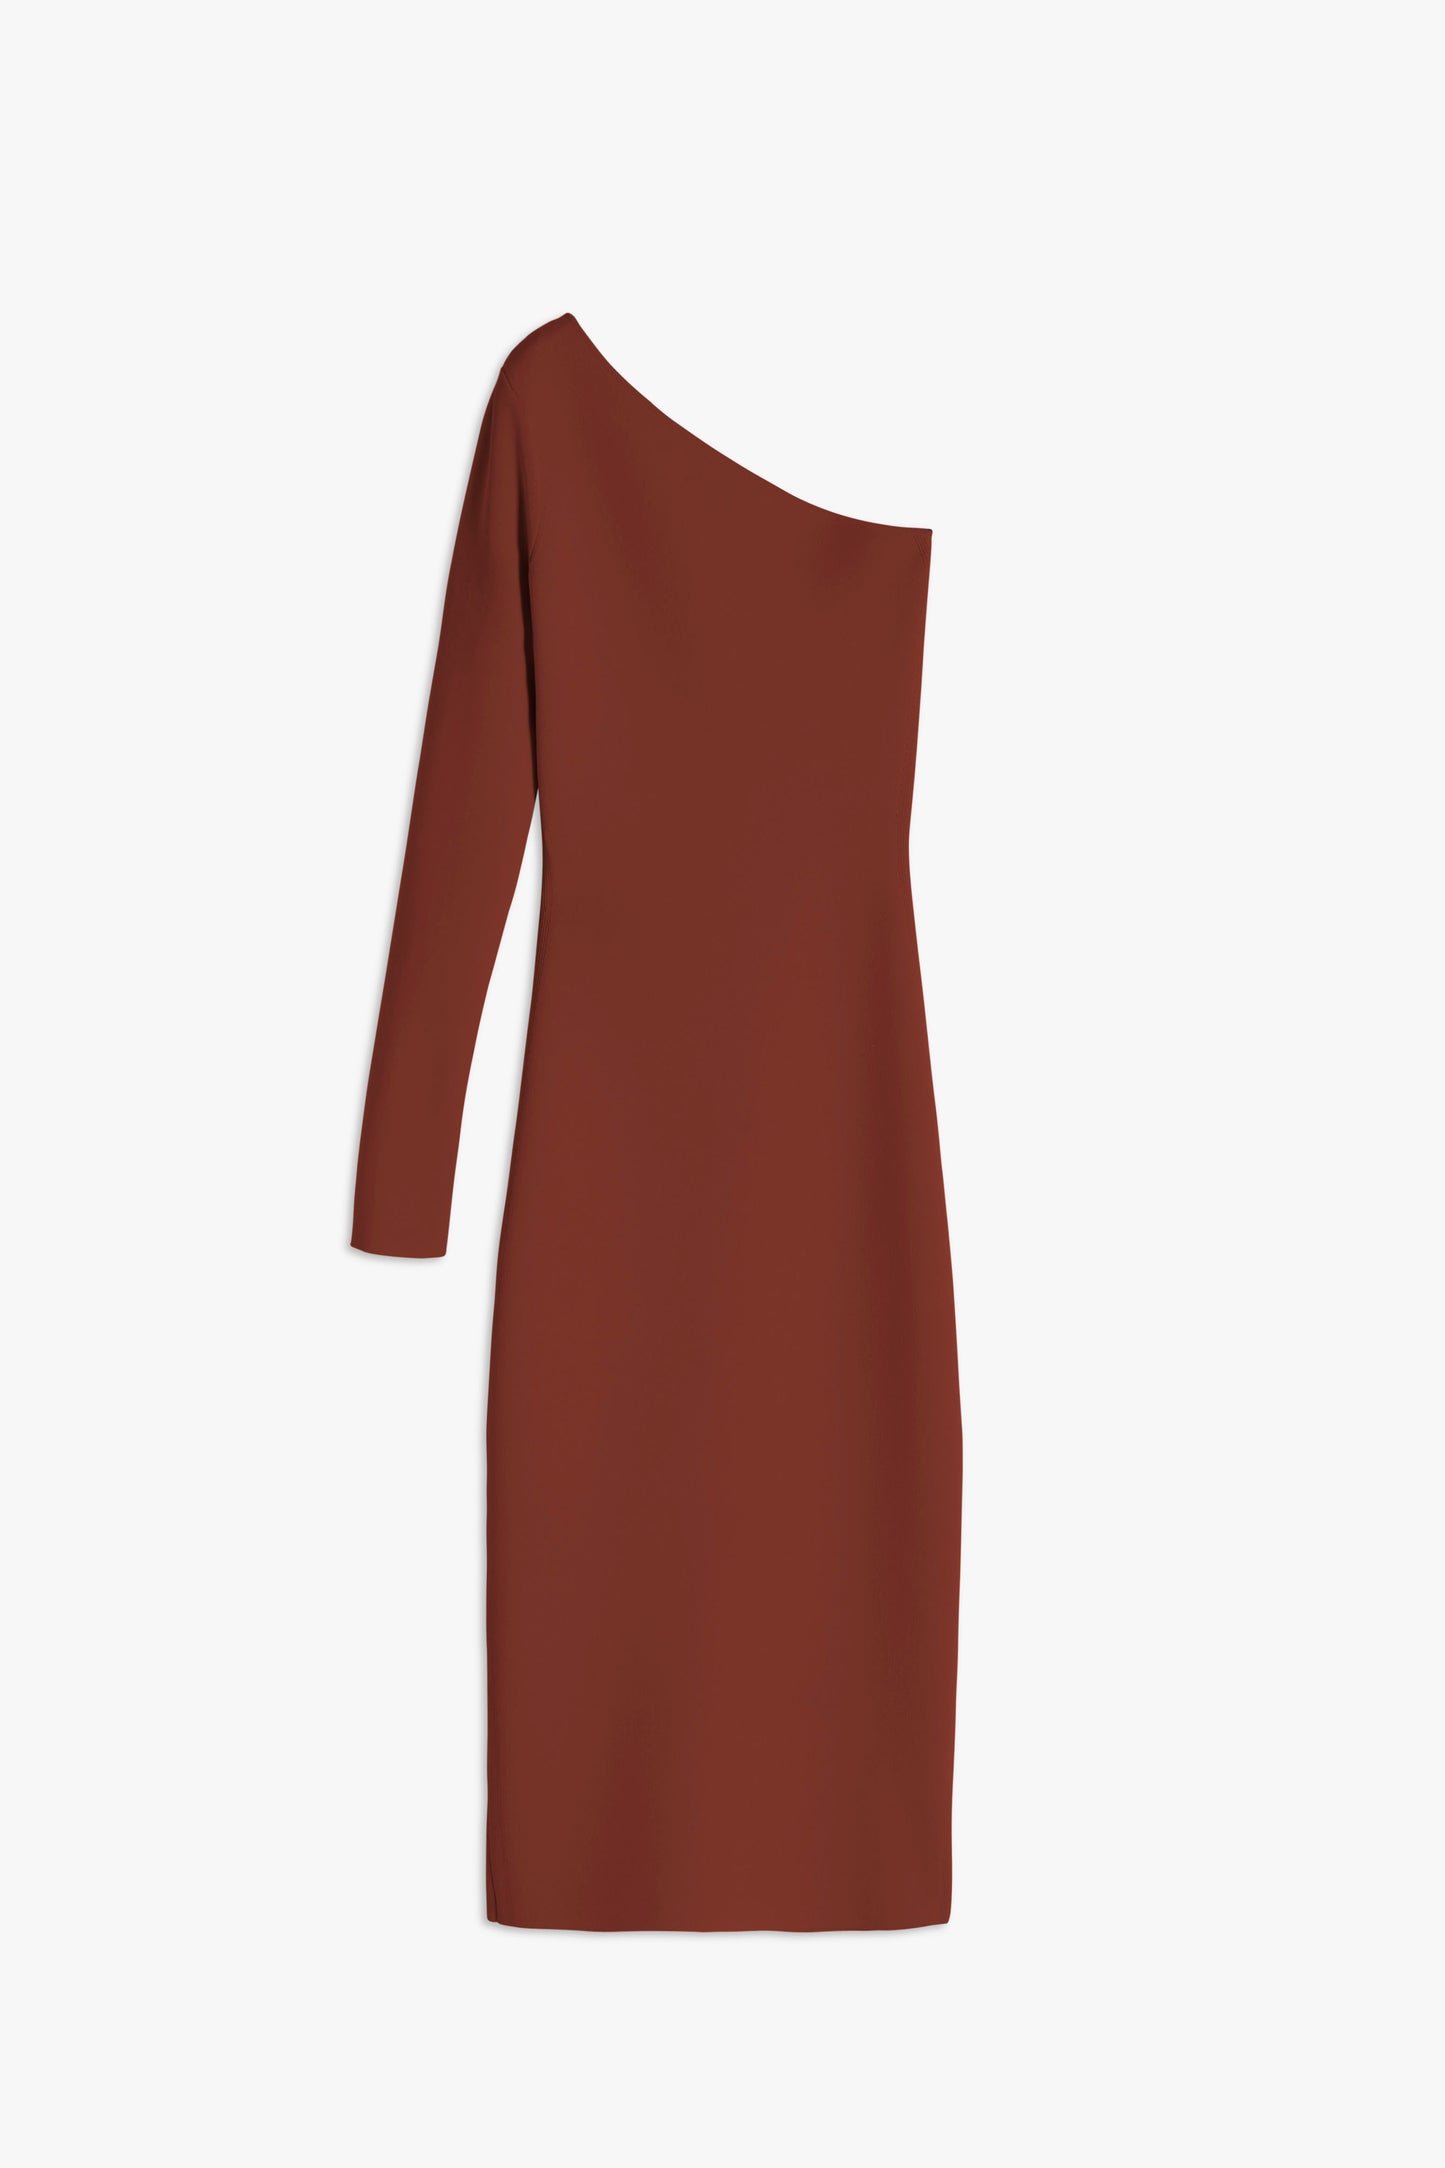 Product view of the brown body con midi dress from Victoria Beckham. A compact knit stretch fabric designer dress, with a one sleeve design with a crew neck for a classic, minimal sun dress fit.